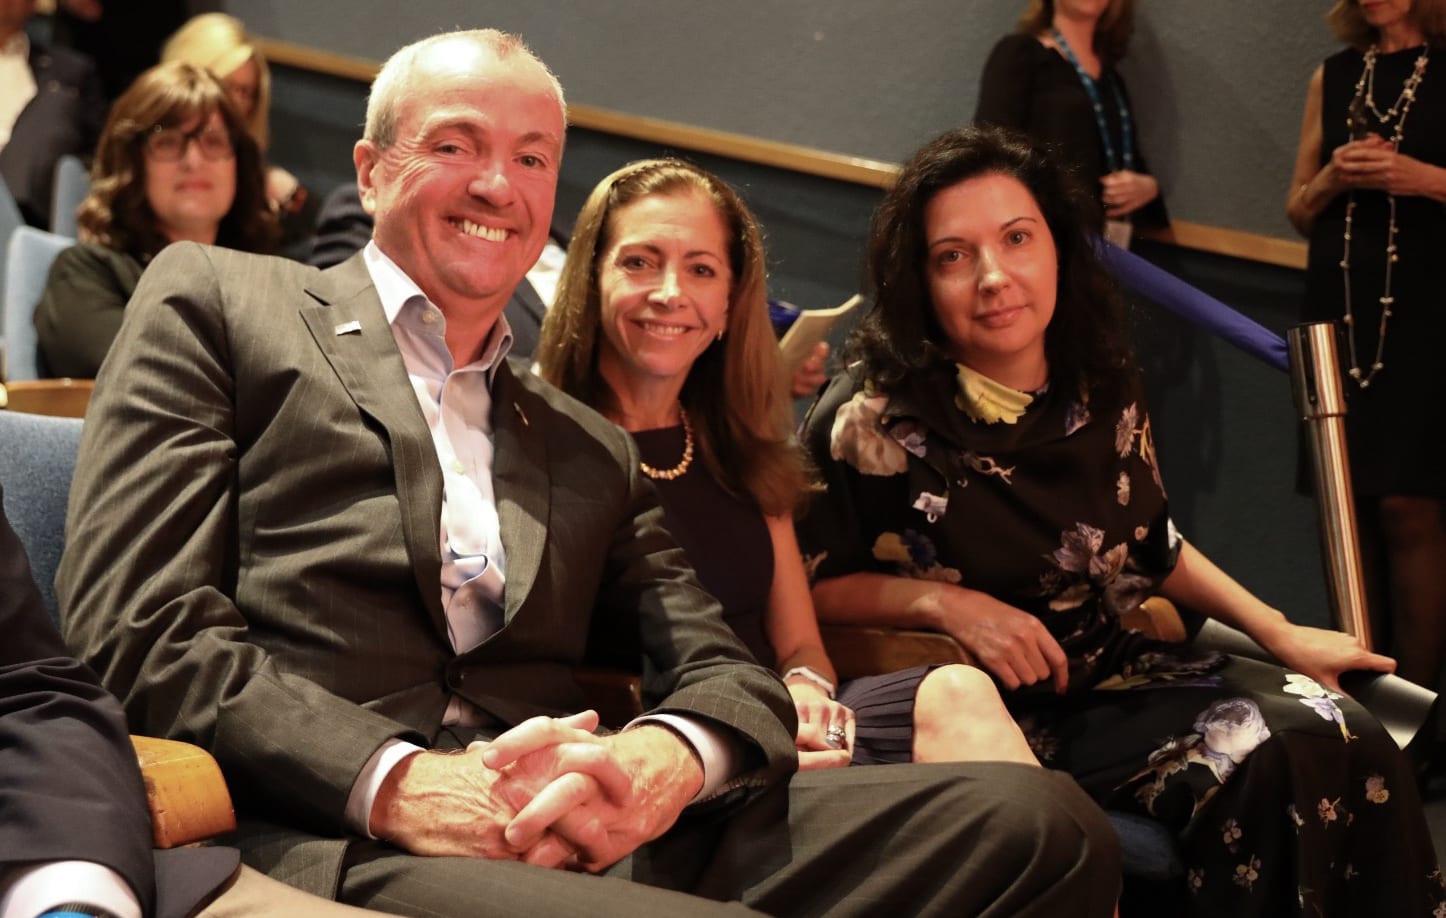 Irina Nevzlin Chair of the Board of Directors of The Museum of the Jewish People at Beit Hatfutsot, and President of the Nadav Foundation, Tami and Phil Murphy the Governor of New Jersey at the event held at Museum of the Jewish people at Beit Hatfutsot